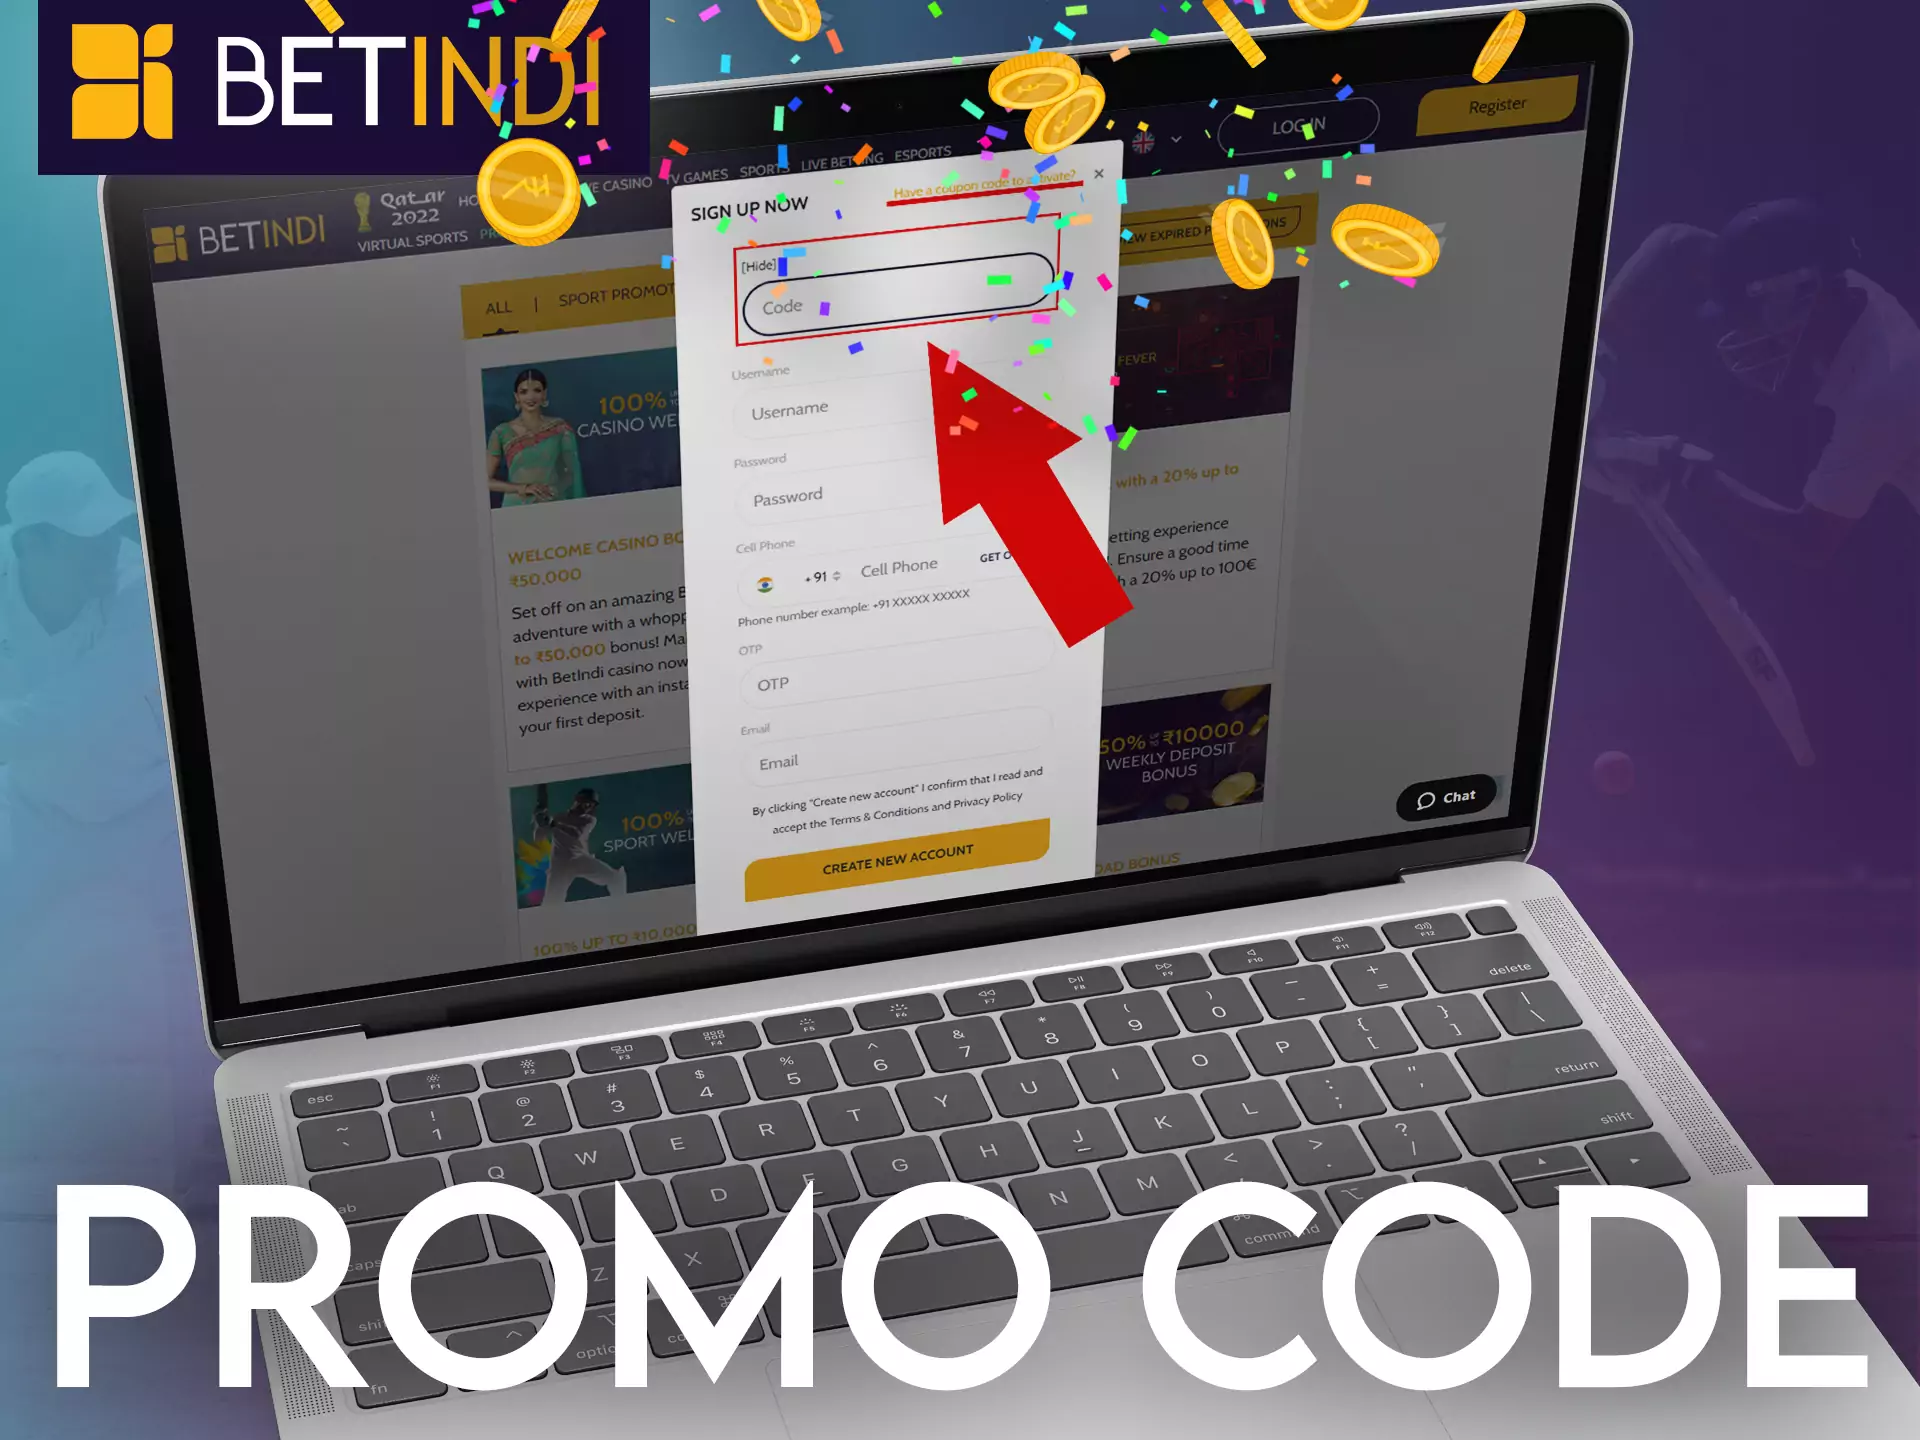 Use a special promo code when registering on Betindi, get nice bonuses.